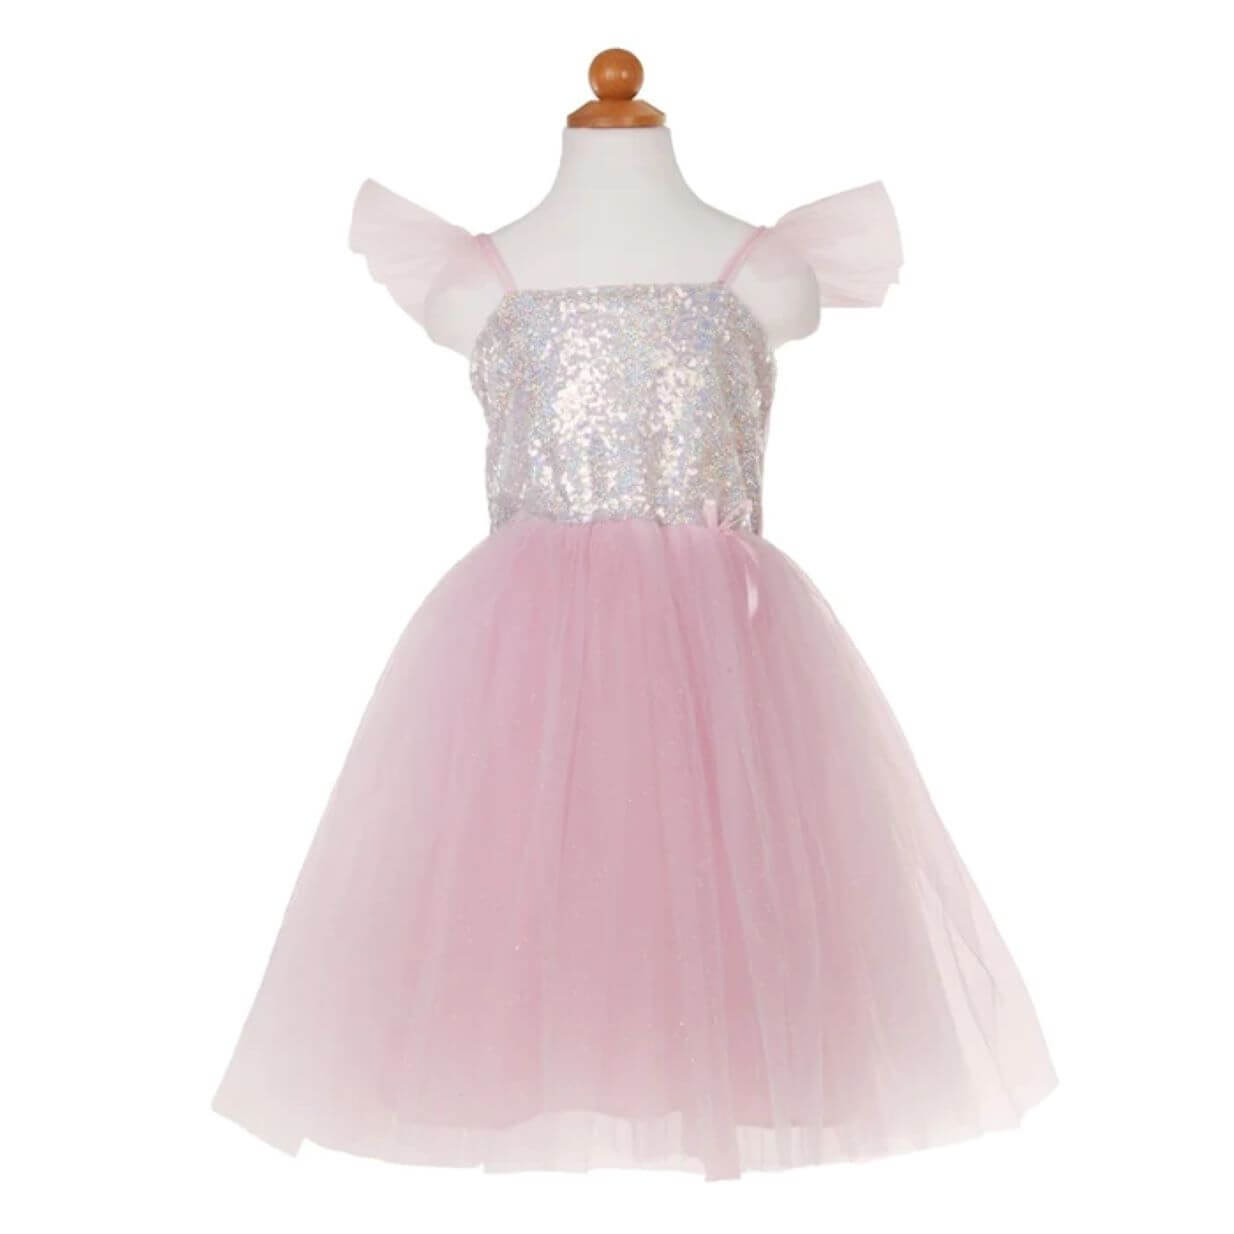 Pink girls party dress with sequinned bodice spaghetti straps and tulle short sleeve with shimmery tulle skirt